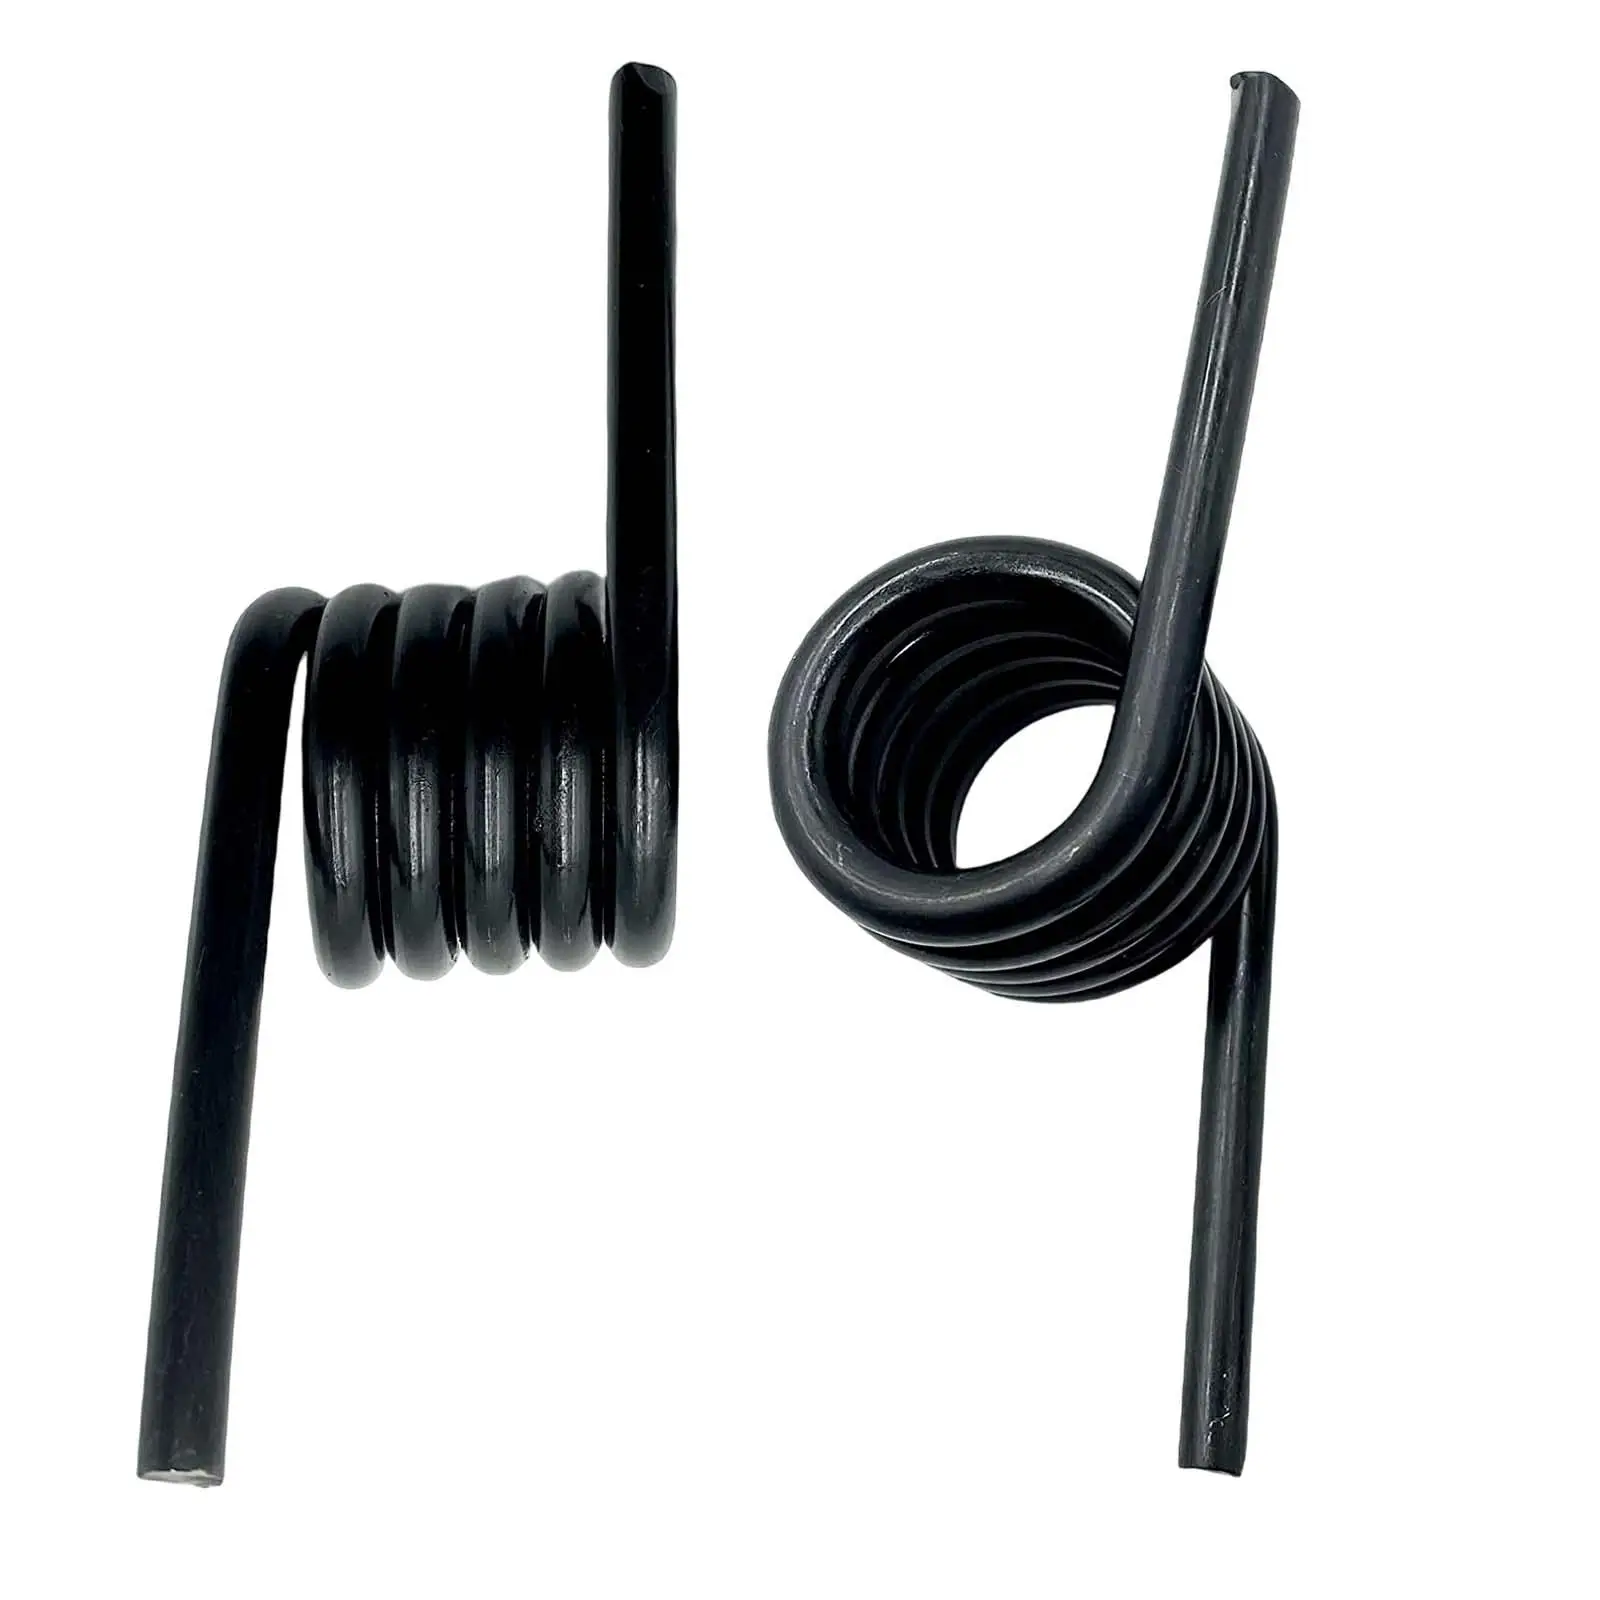 2 Pieces Torsion Ramp Spring 3034278 Left and Right Hand High Strength Fits for Trailer Ramps Direct Replaces